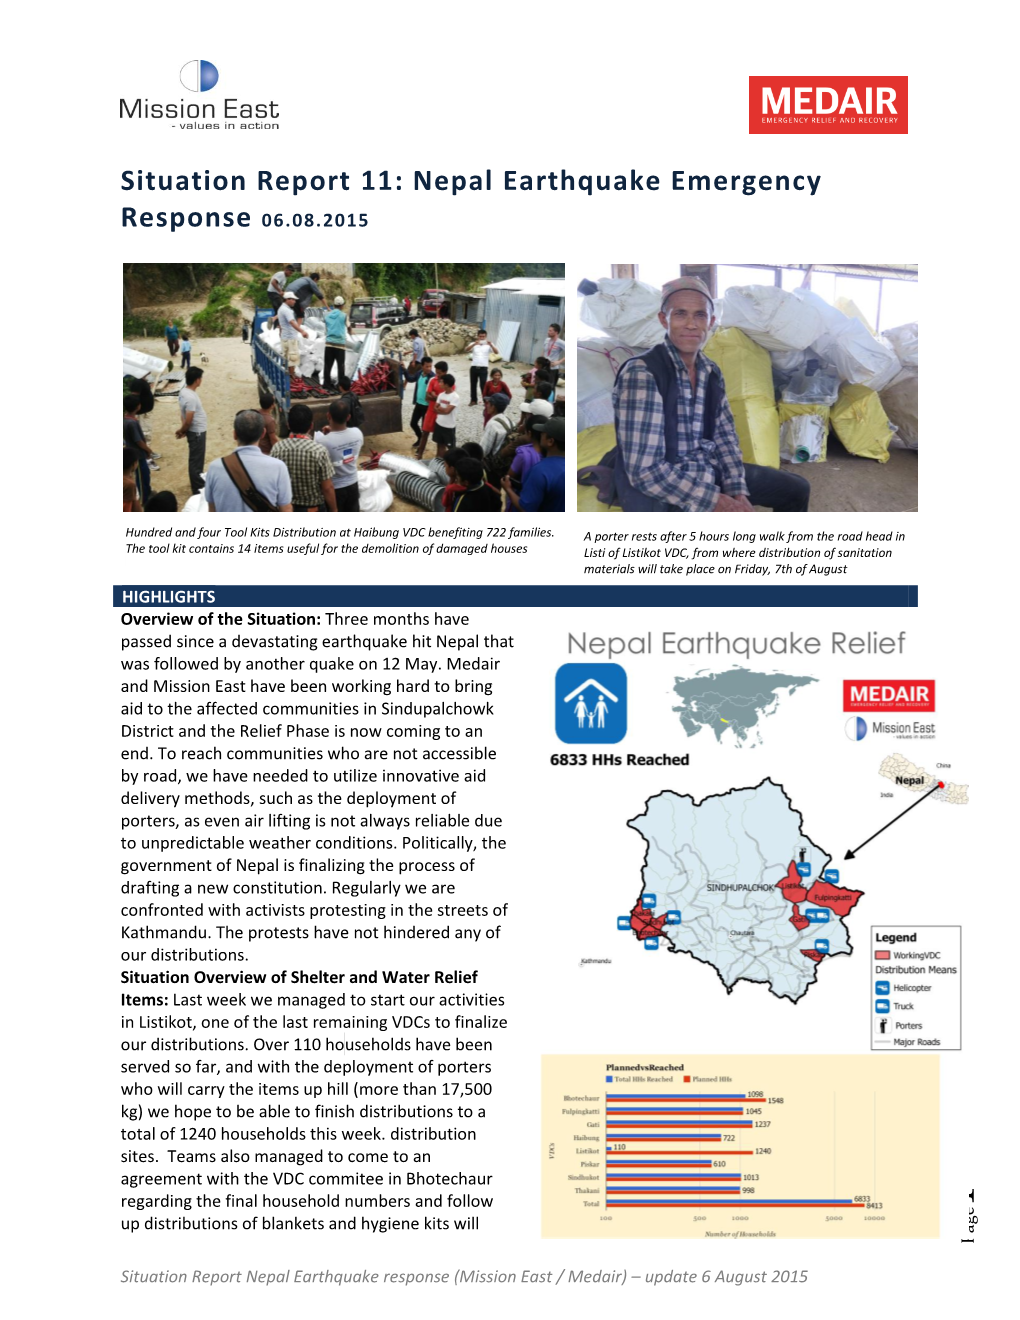 Situation Report 11: Nepal Earthquake Emergency Response 06.08.2015